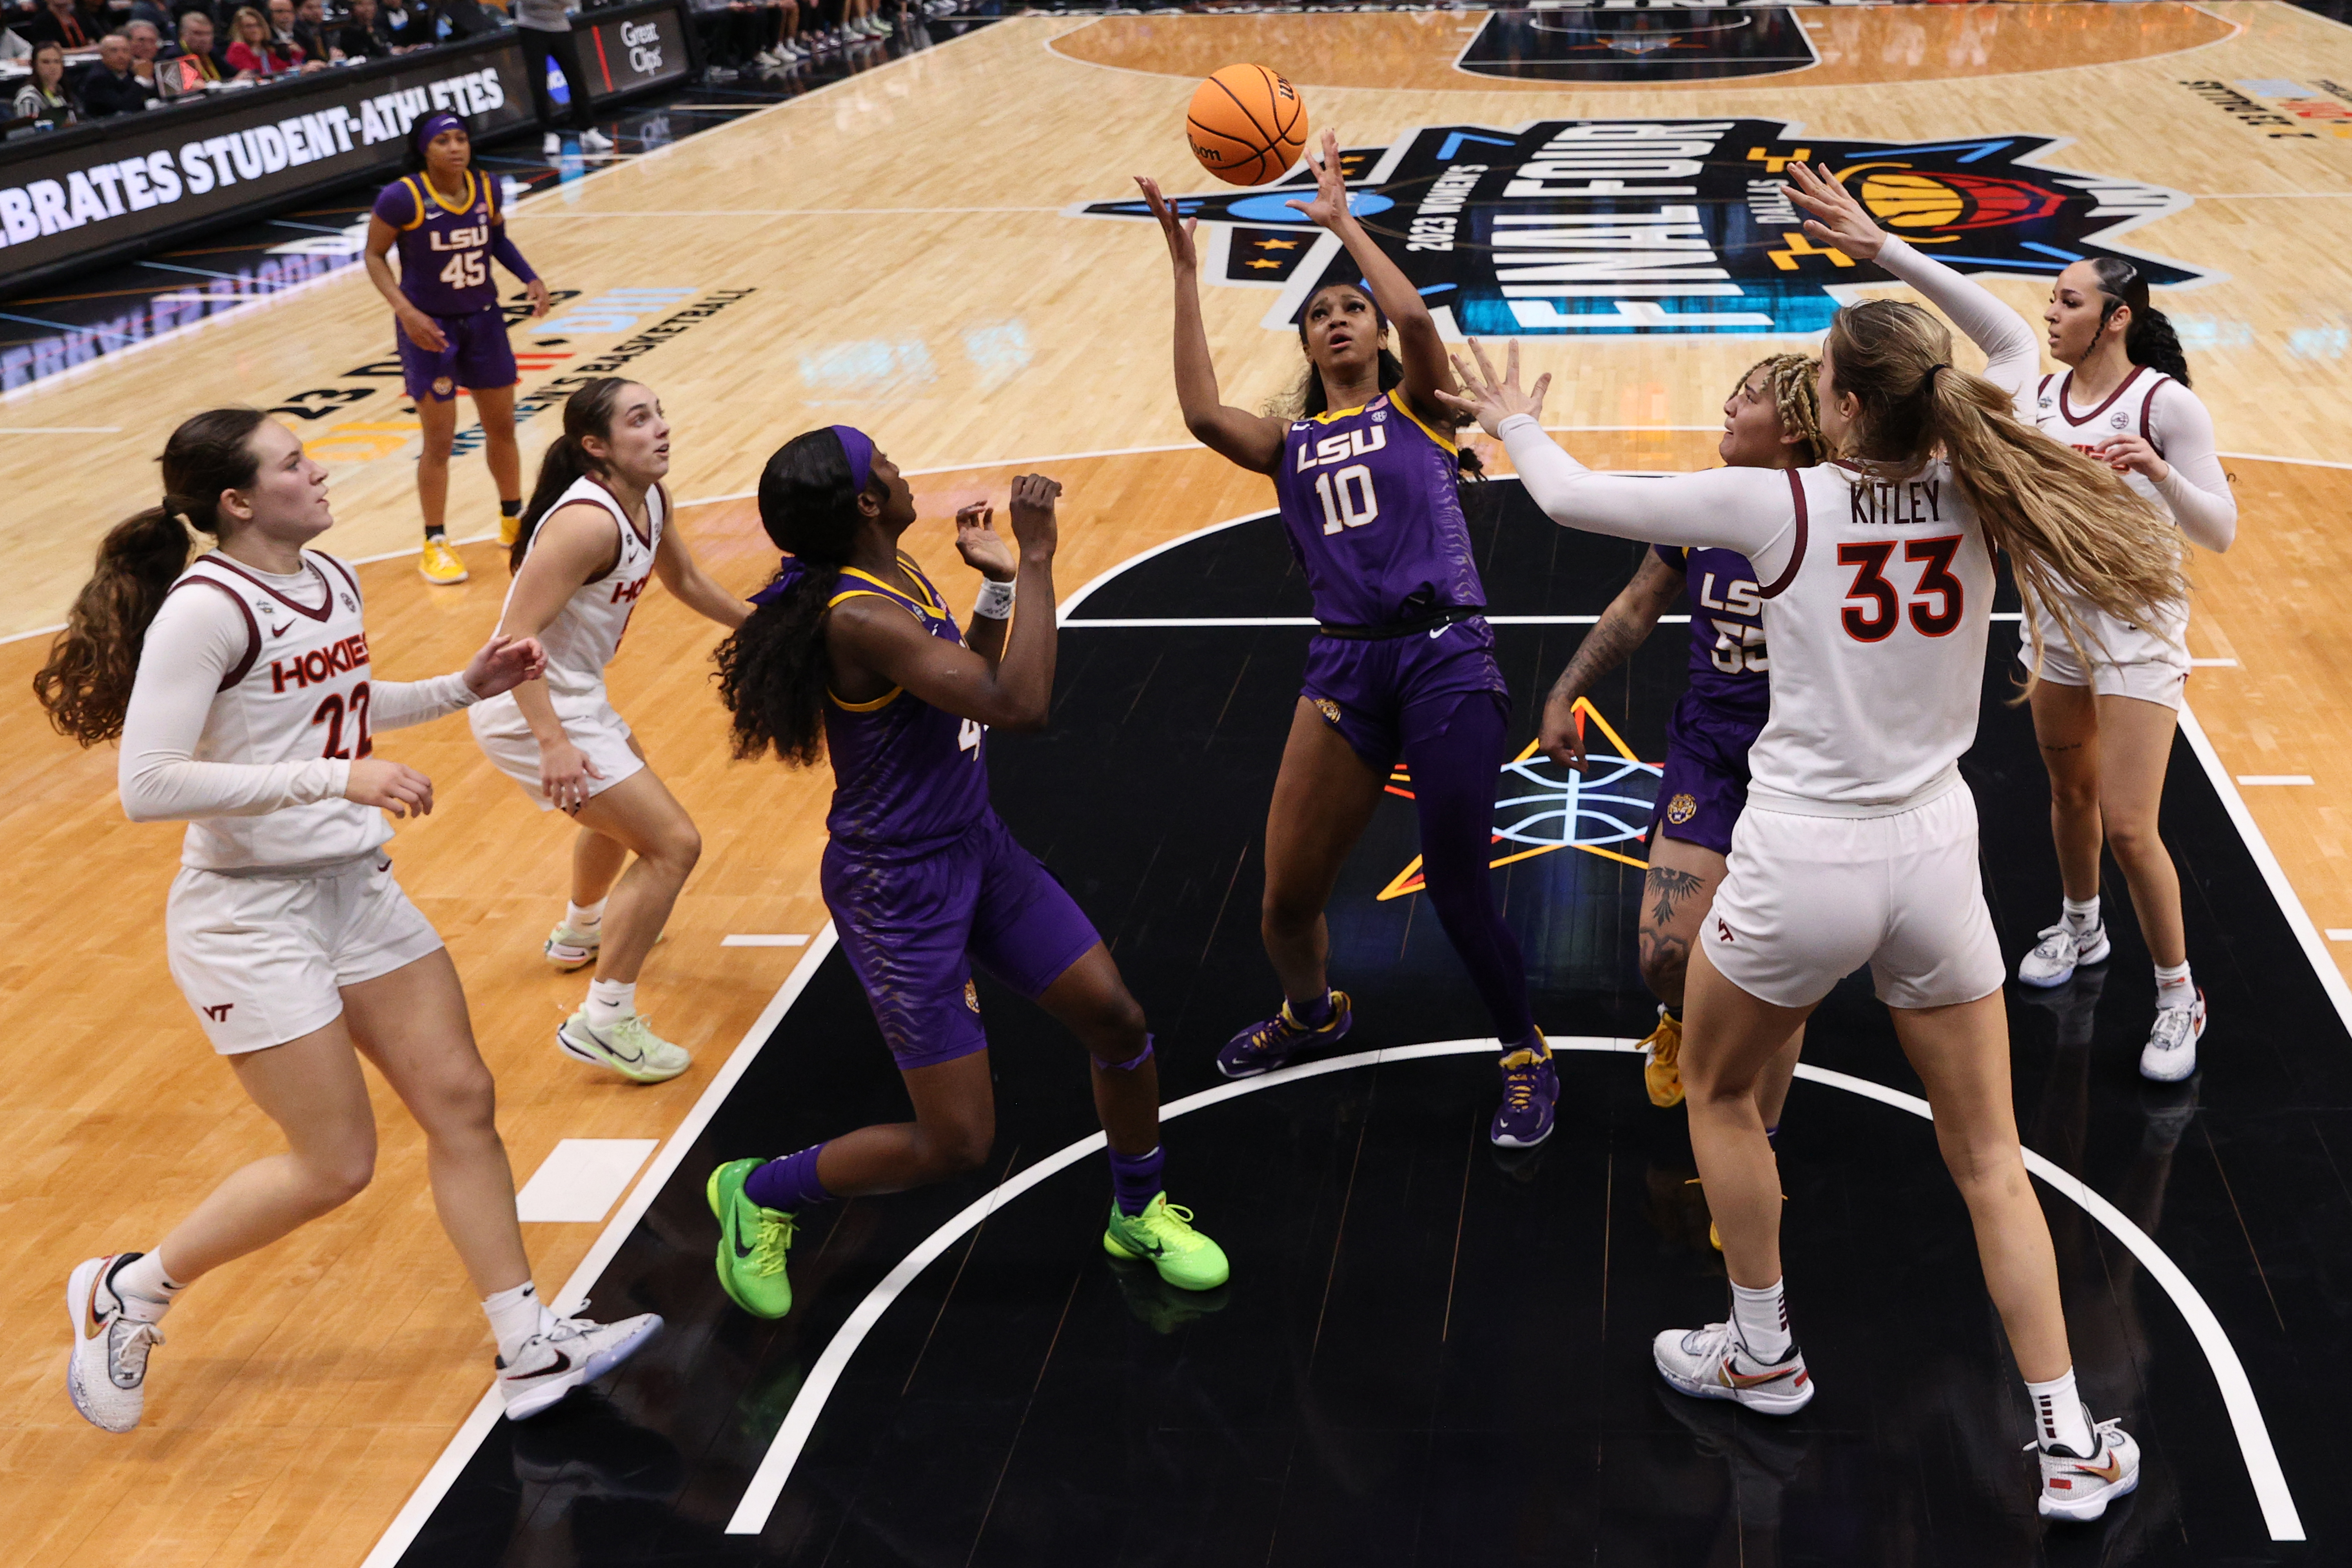 Angel Reese #10 of the LSU Lady Tigers receives a pass in the lane during the fourth quarter against the Virginia Tech Hokies during the 2023 NCAA Women’s Basketball Tournament Final Four semifinal game at American Airlines Center on March 31, 2023 in Dallas, Texas.